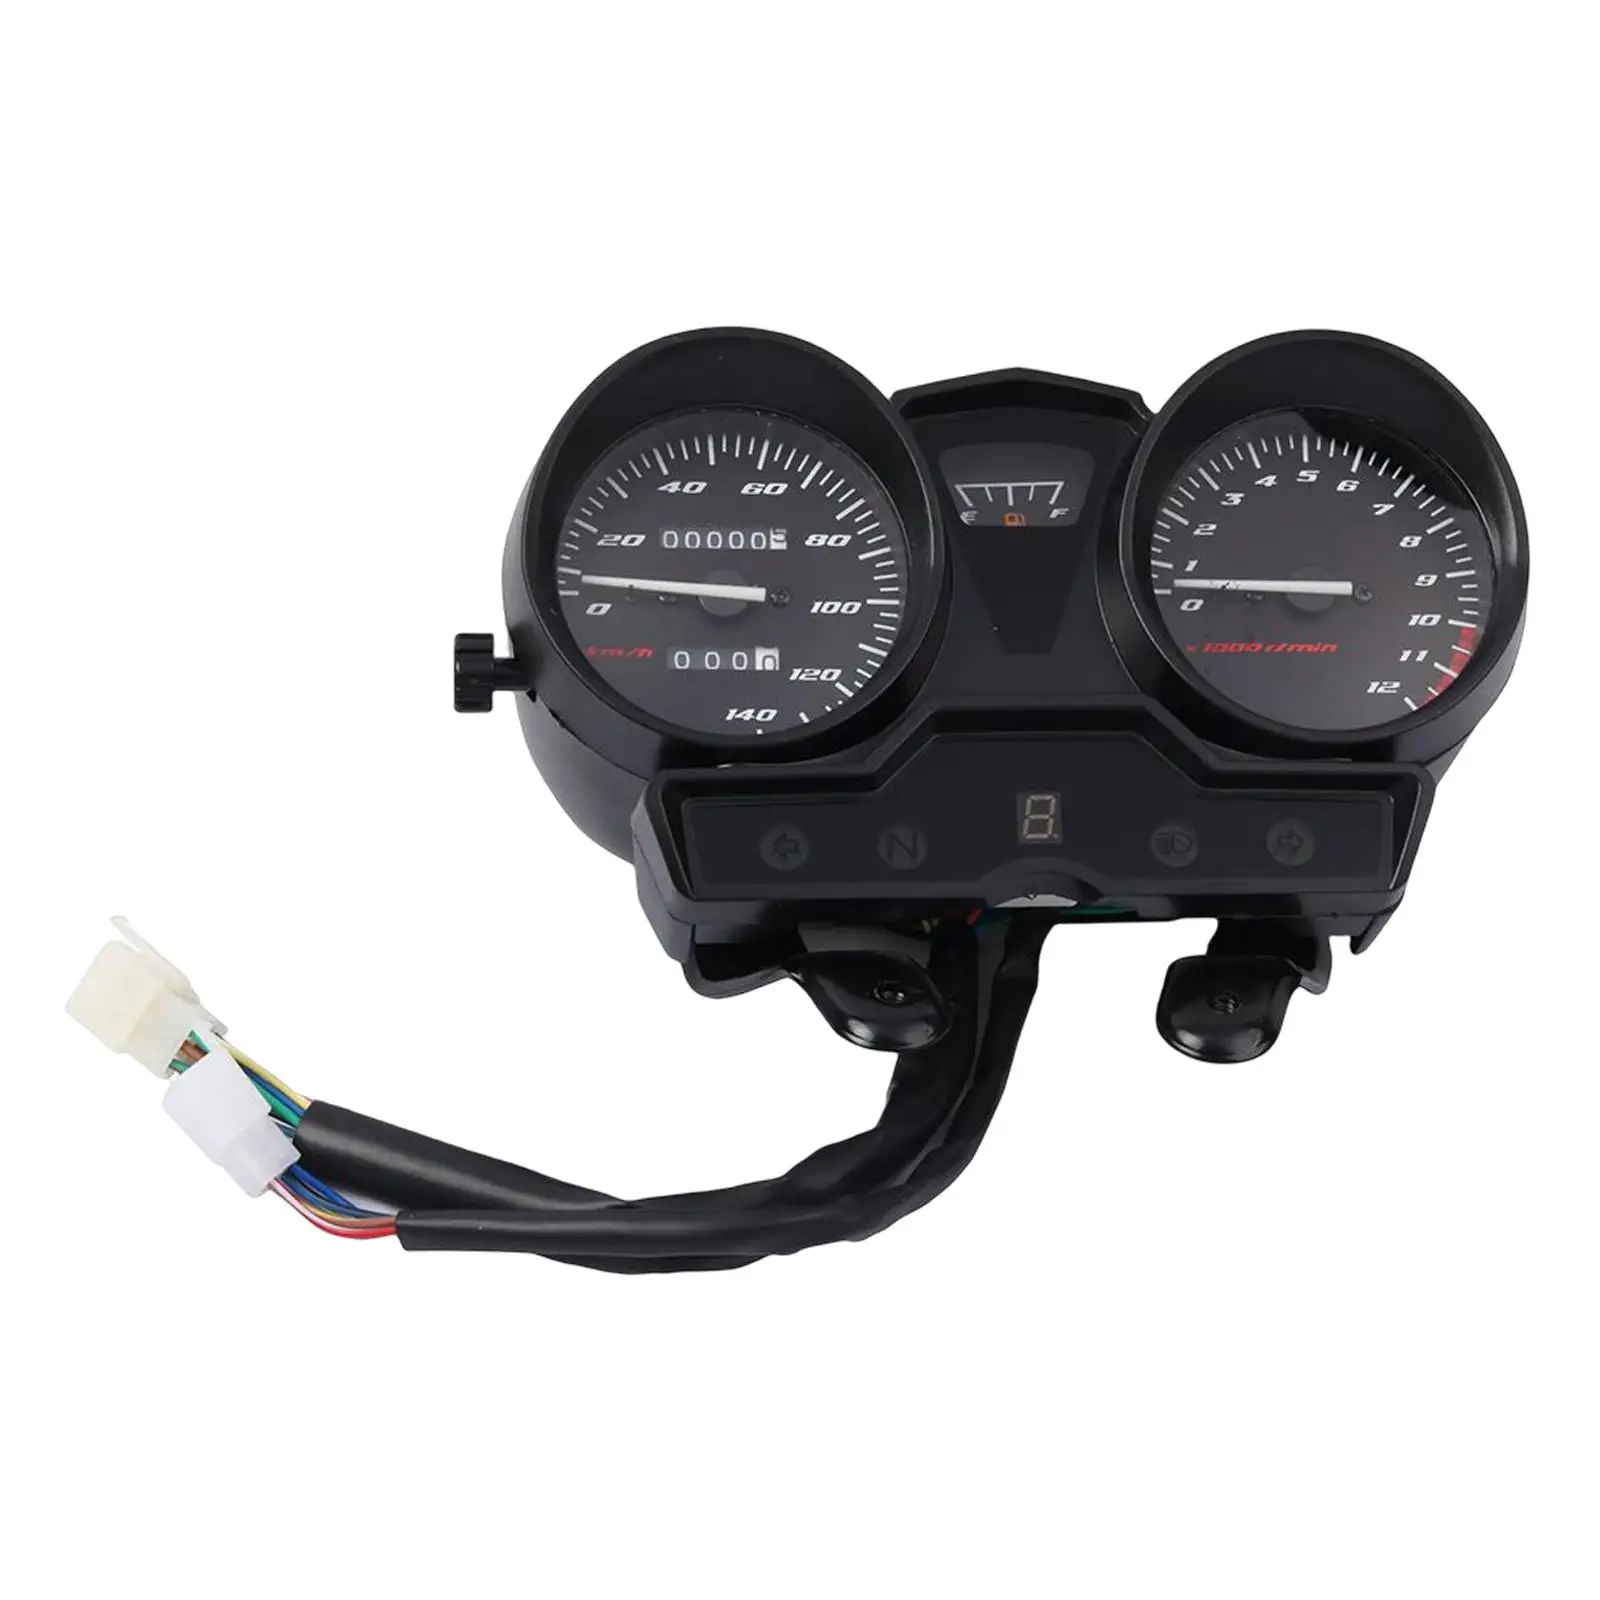 LED Digital Dashboard Motorcycle RPM Meter with Gear Display Replaces High performance Parts Easy to Install Premium